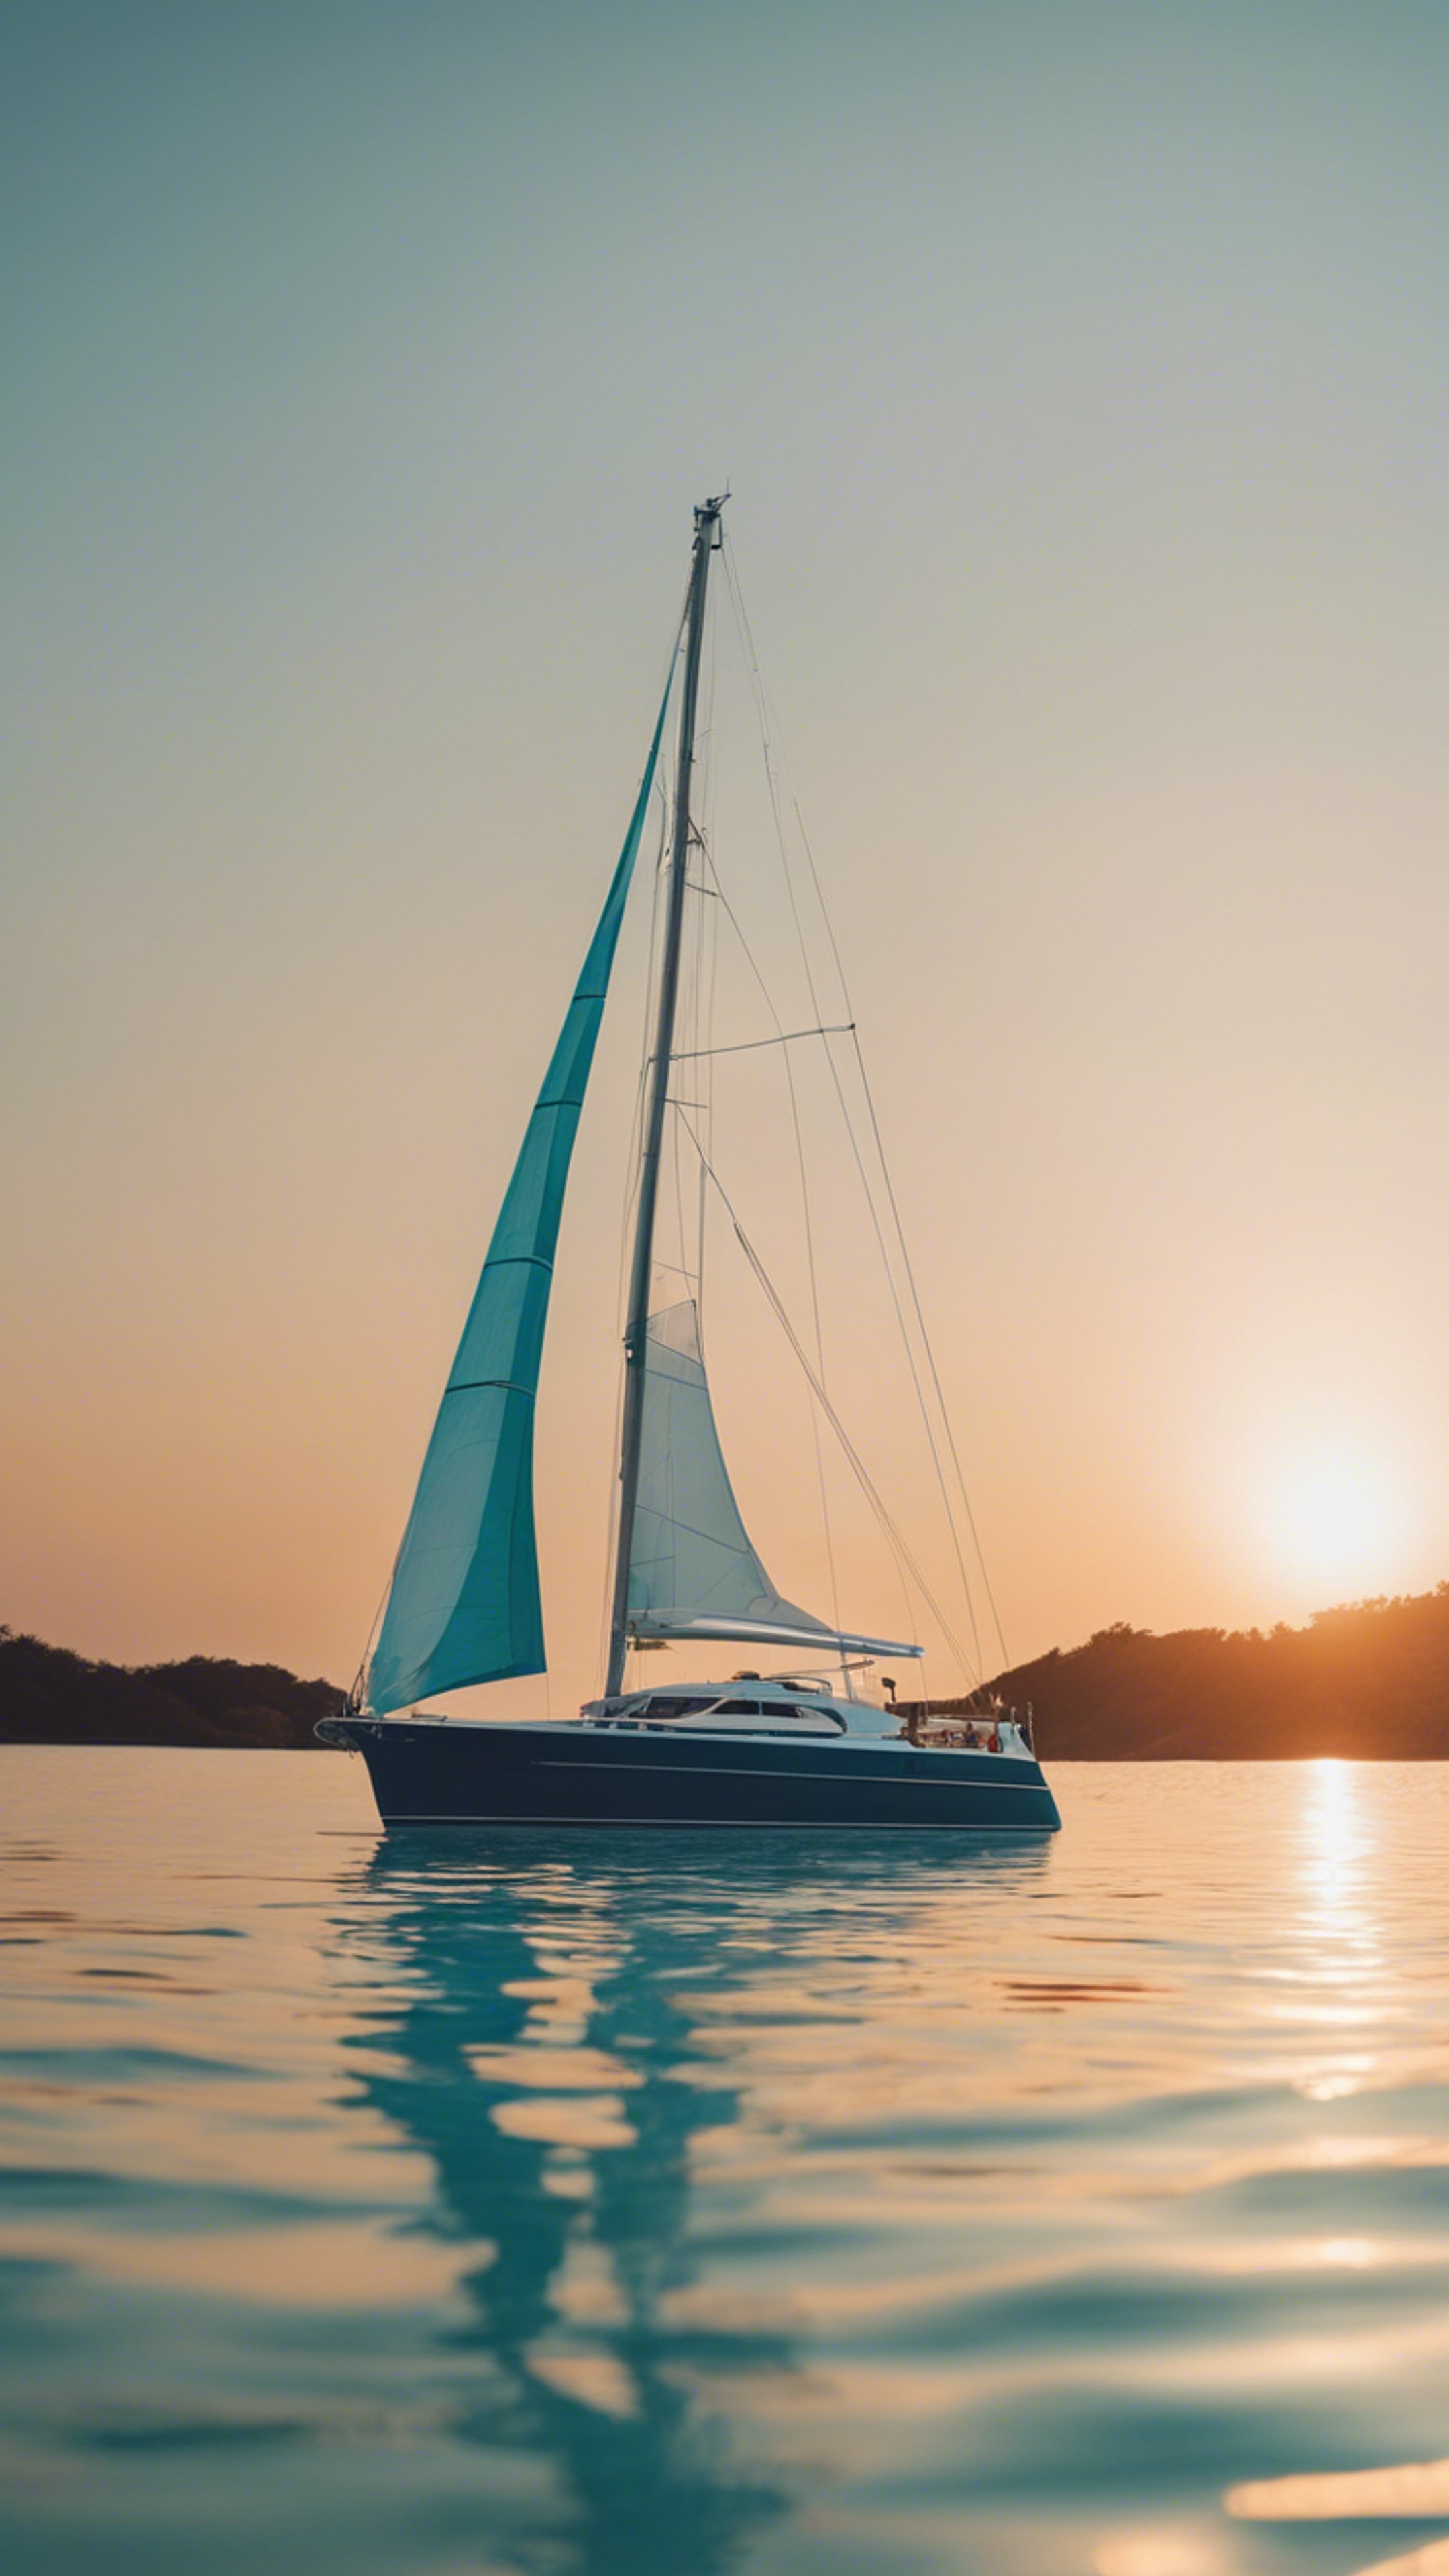 A preppy blue yacht sailing calmly on clear aquamarine waters at sunset.壁紙[1bfcce9f38c64176b950]